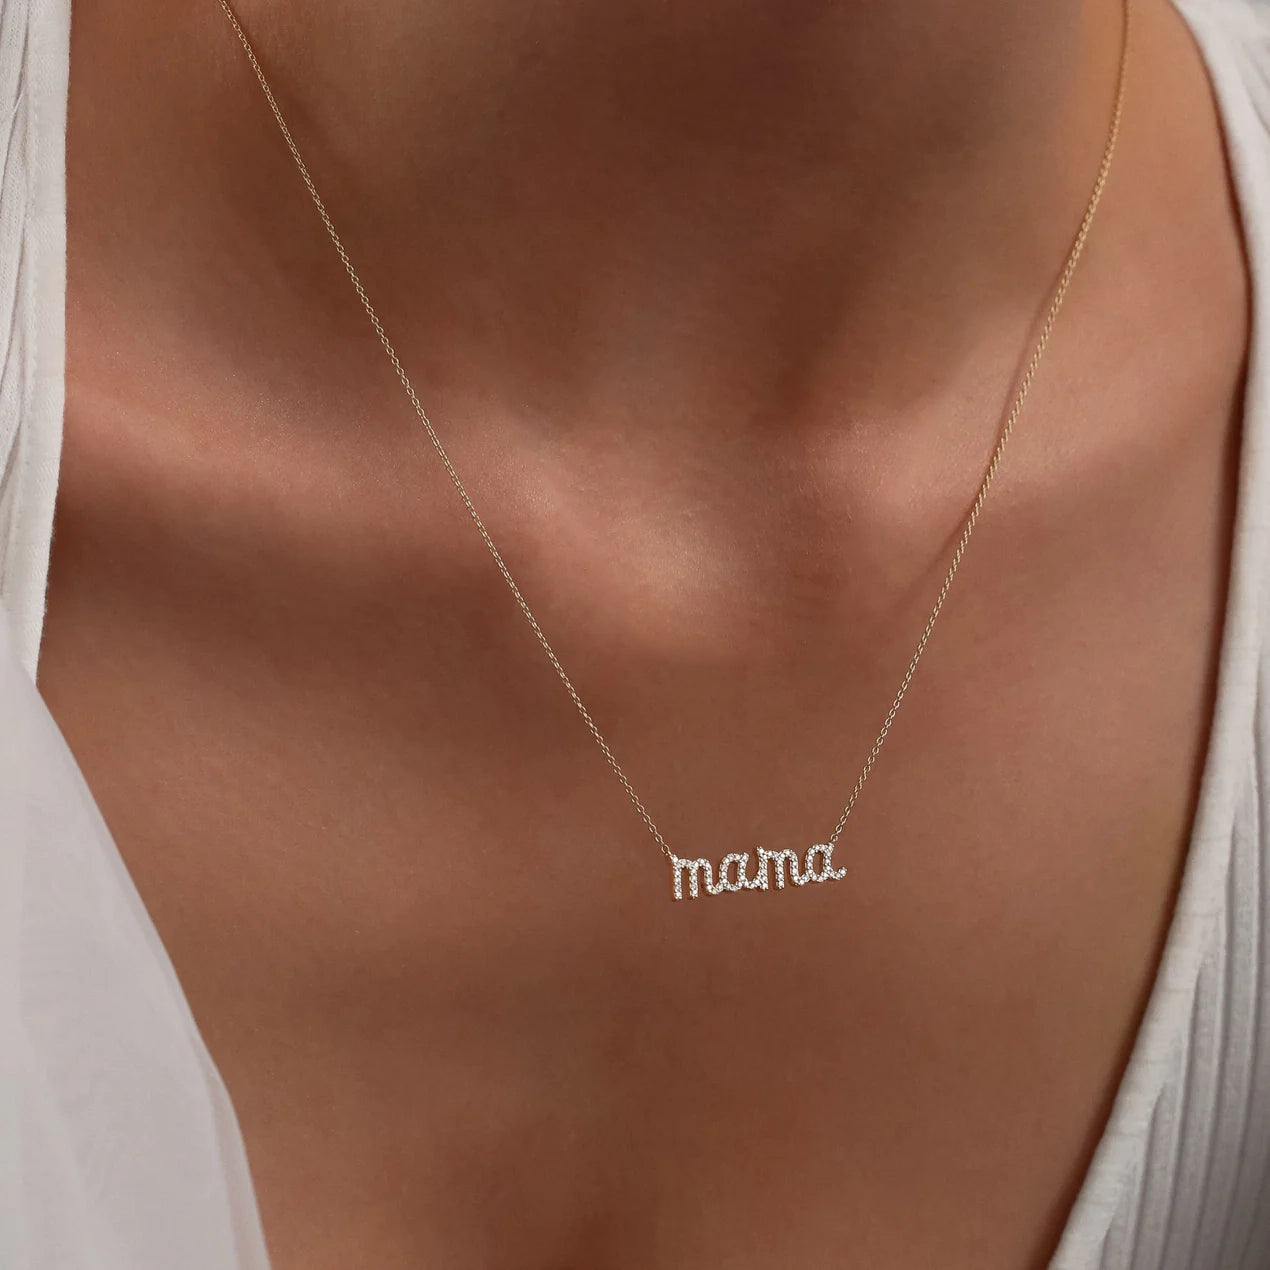 Mama Letter Necklace